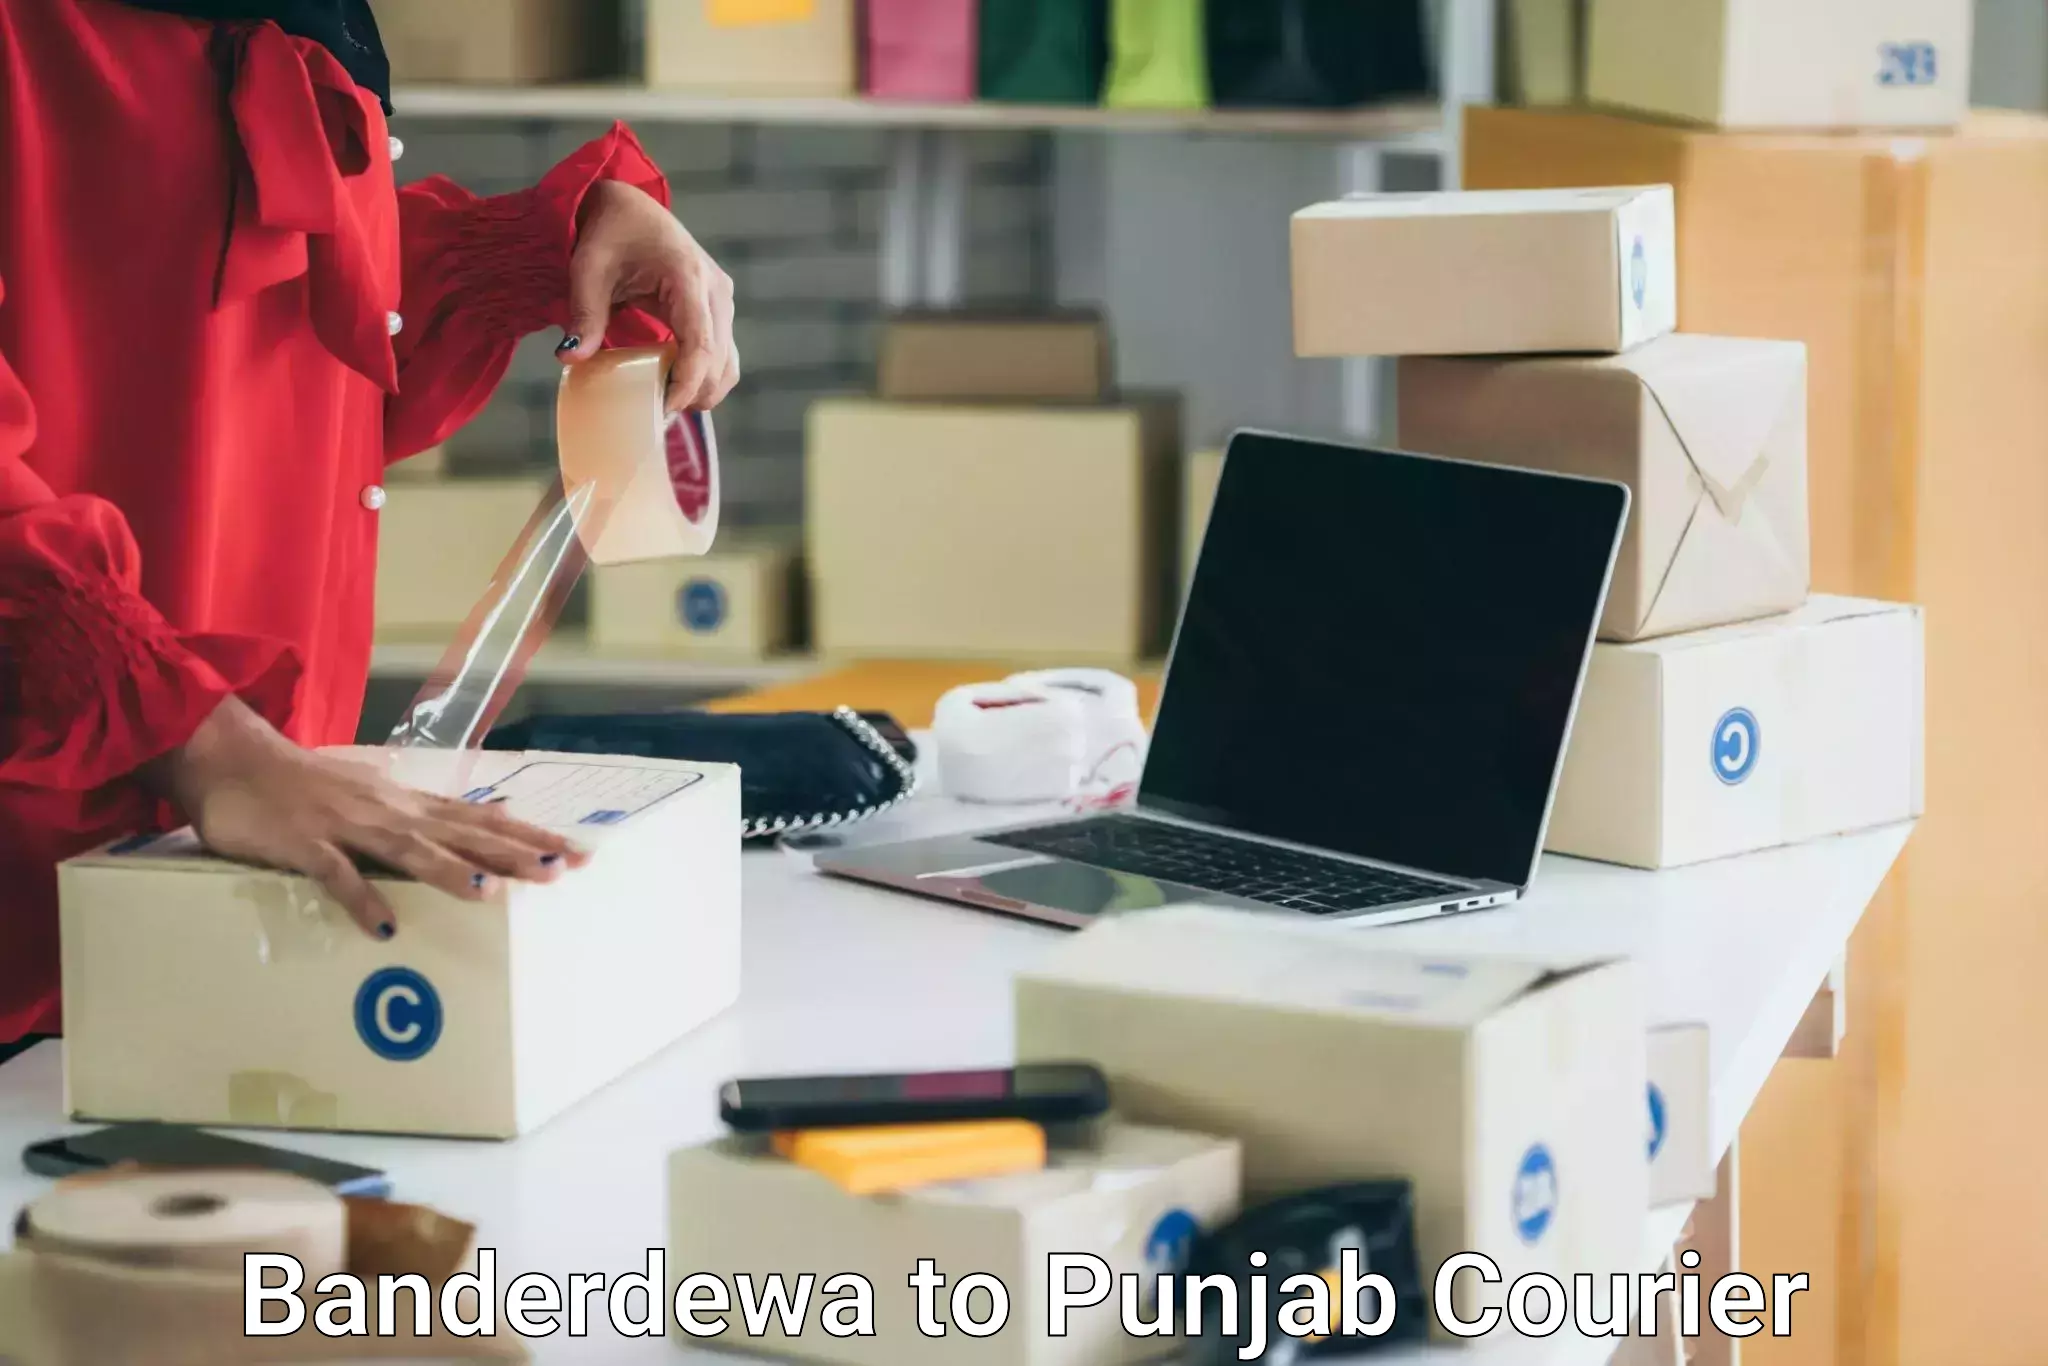 Affordable moving services in Banderdewa to Bathinda